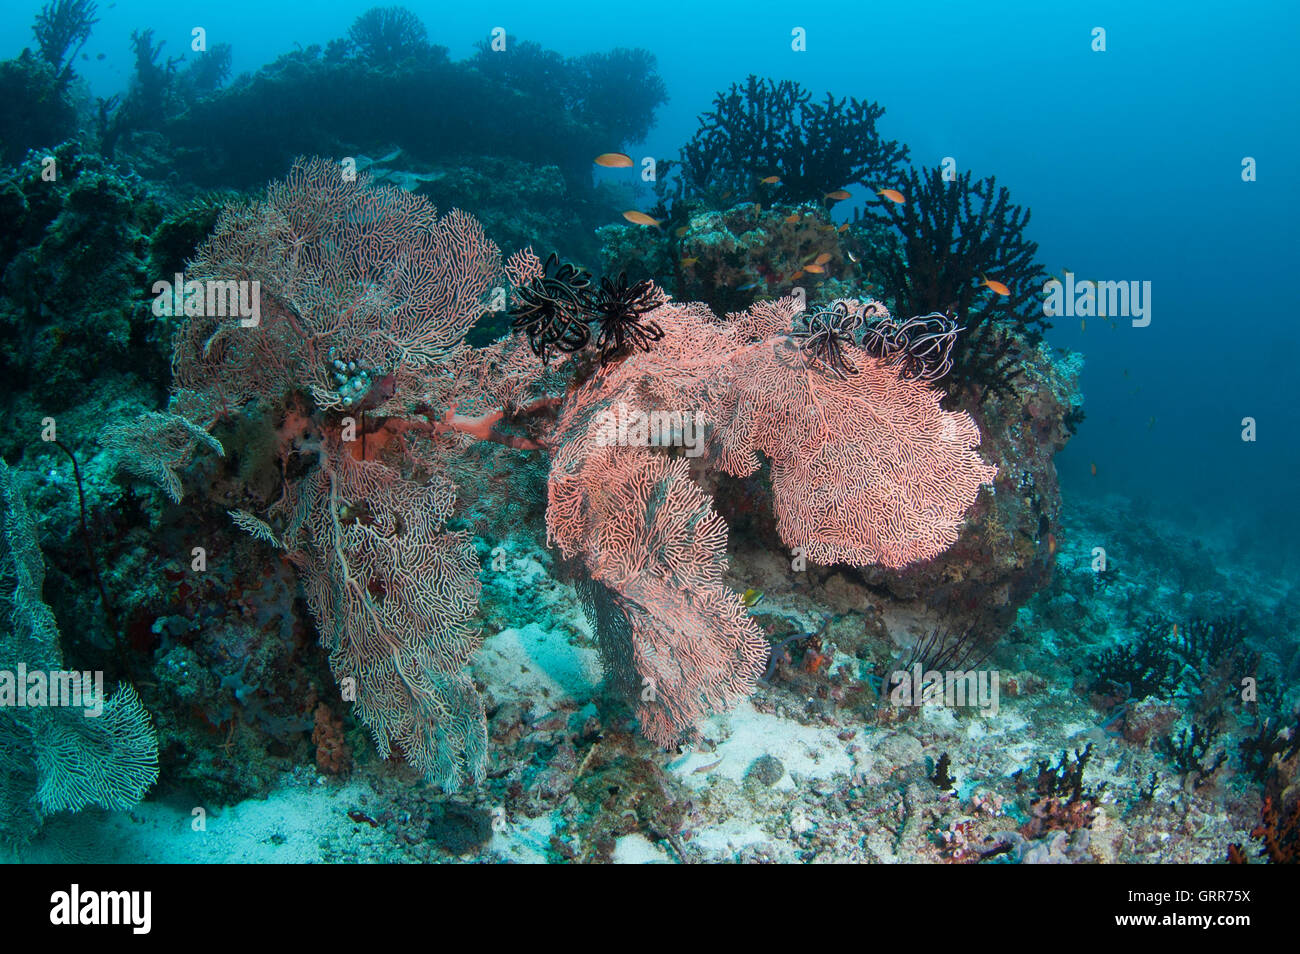 Pair of giant gorgonian sea fan and hard coral garden. Stock Photo